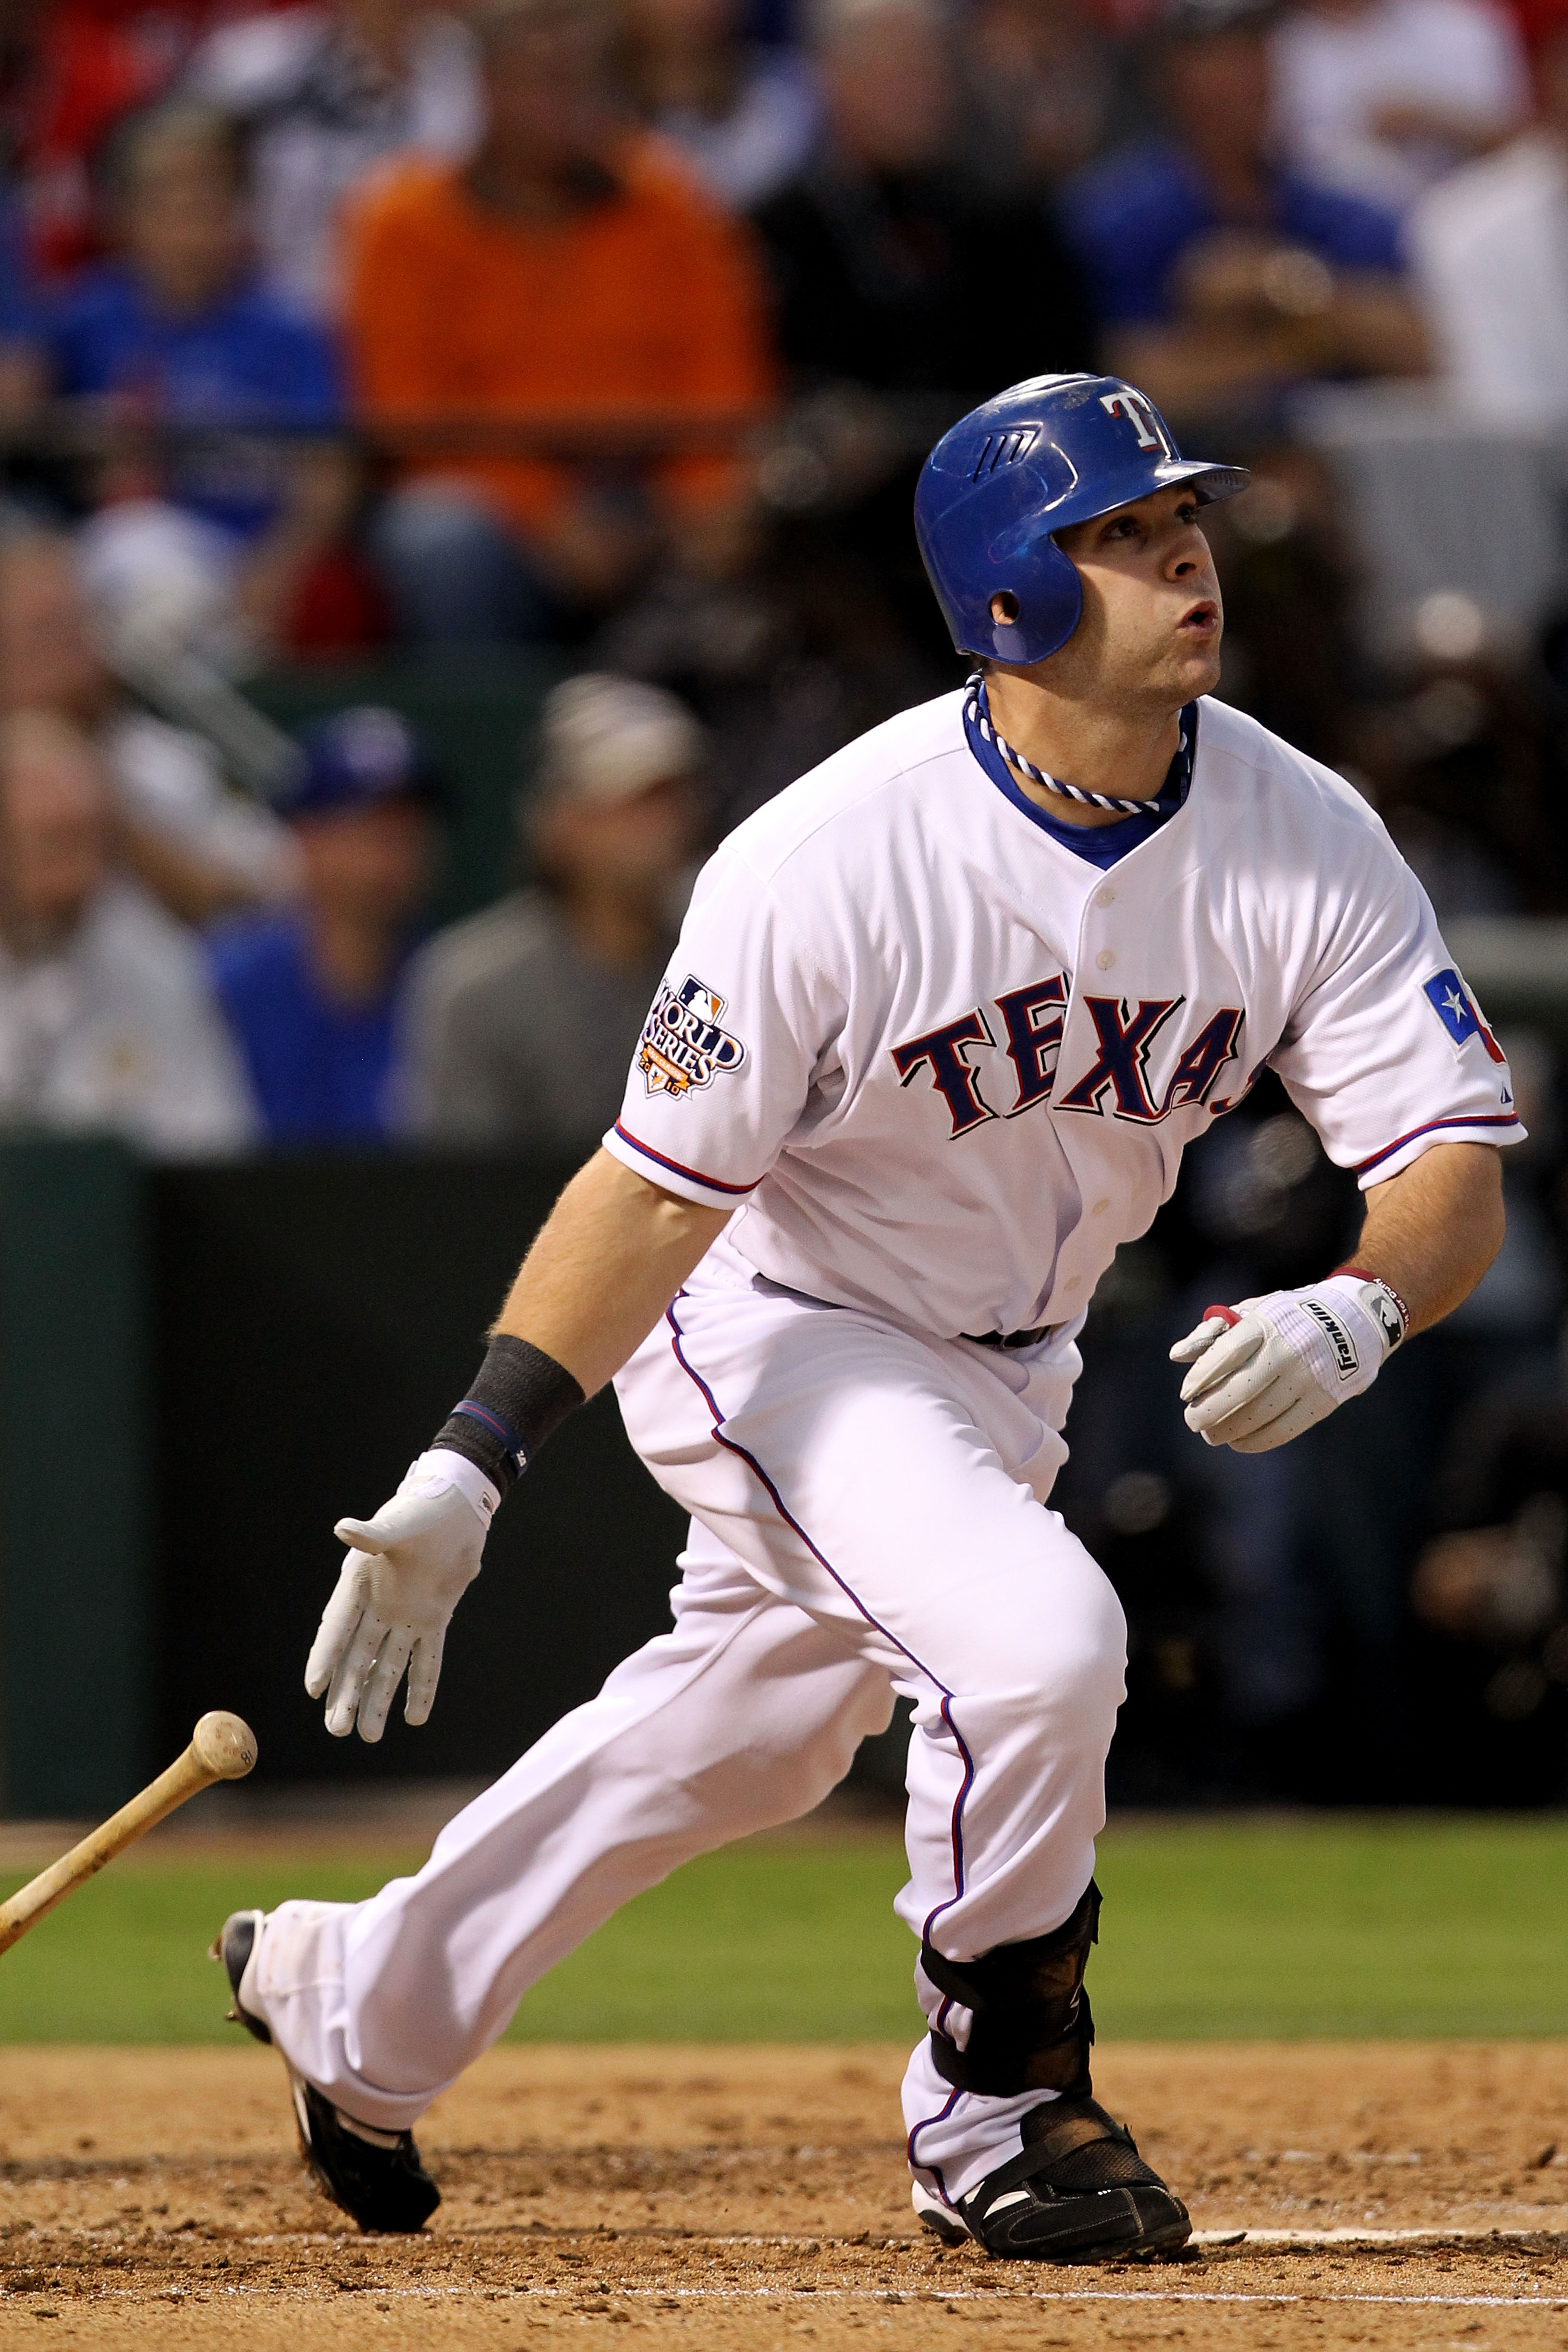 ARLINGTON, TX - OCTOBER 30:  Mitch Moreland #18 of the Texas Rangers hits a 3-run home run in the bottom of the second inning against the San Francisco Giants in Game Three of the 2010 MLB World Series at Rangers Ballpark in Arlington on October 30, 2010